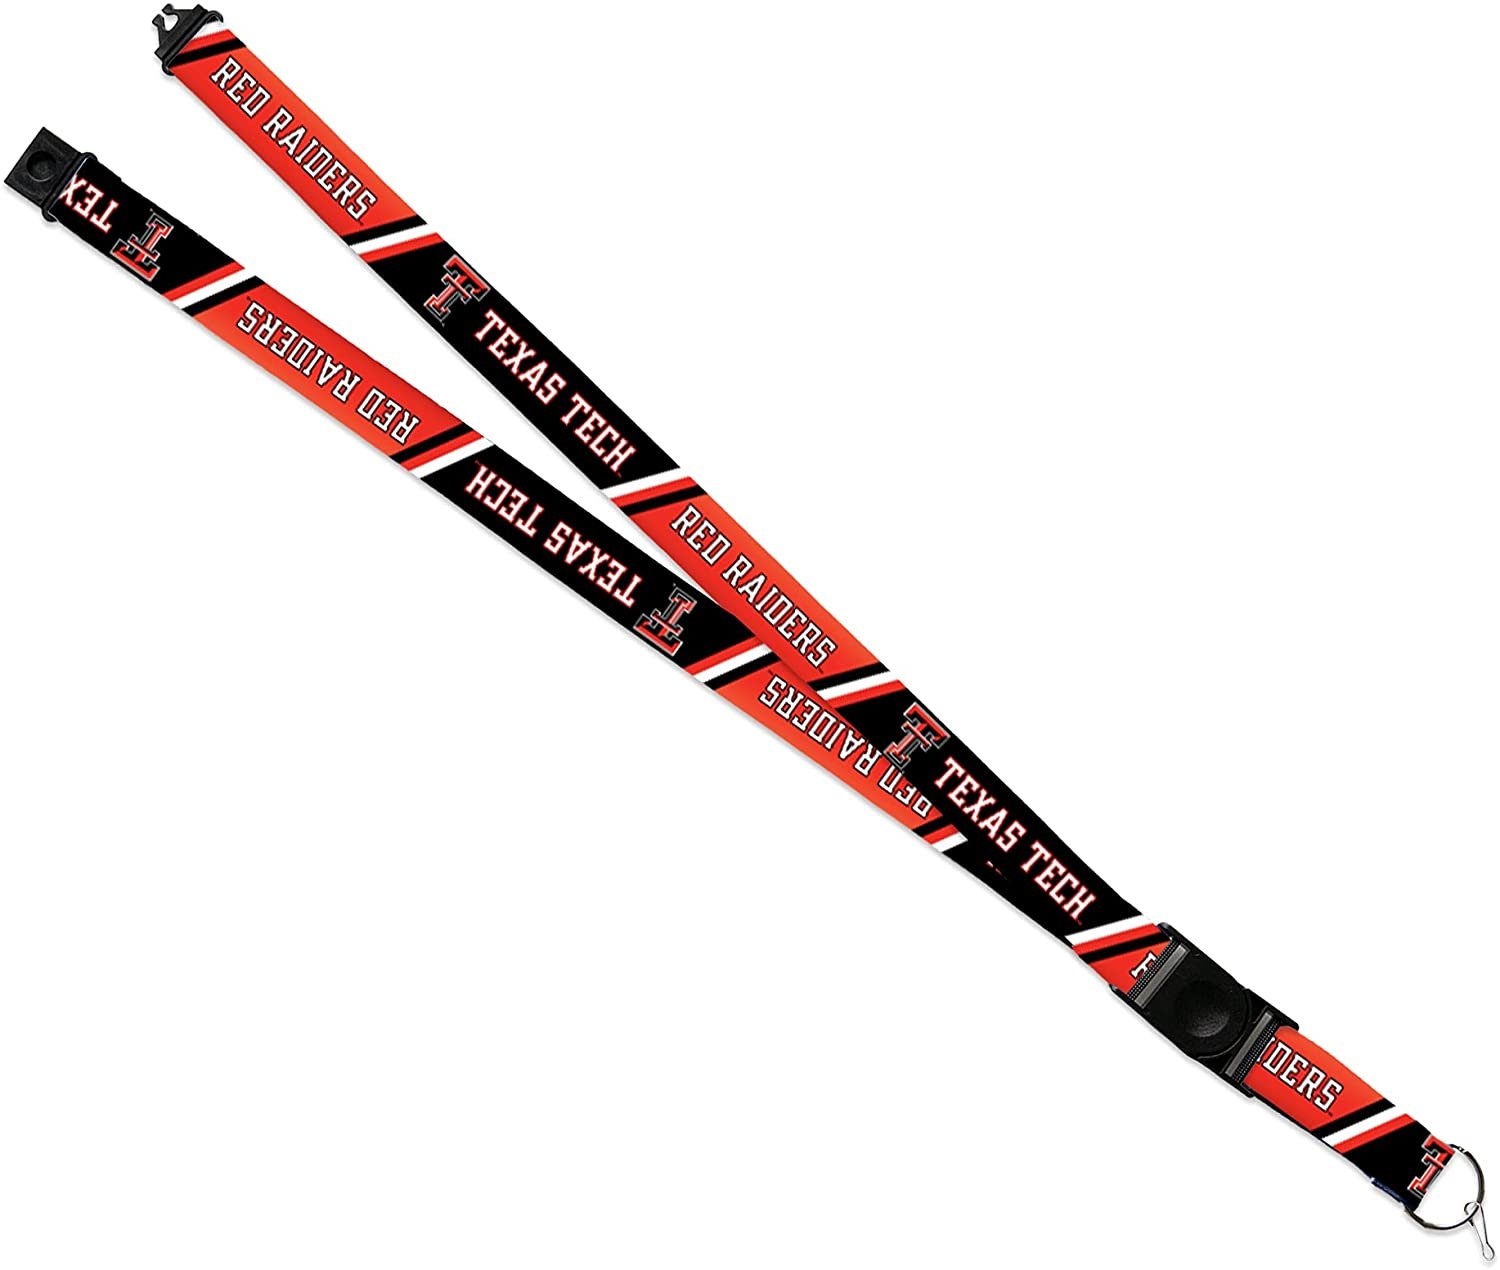 Texas Tech University Red Raiders Lanyard Keychain Double Sided Breakaway Safety Design Adult